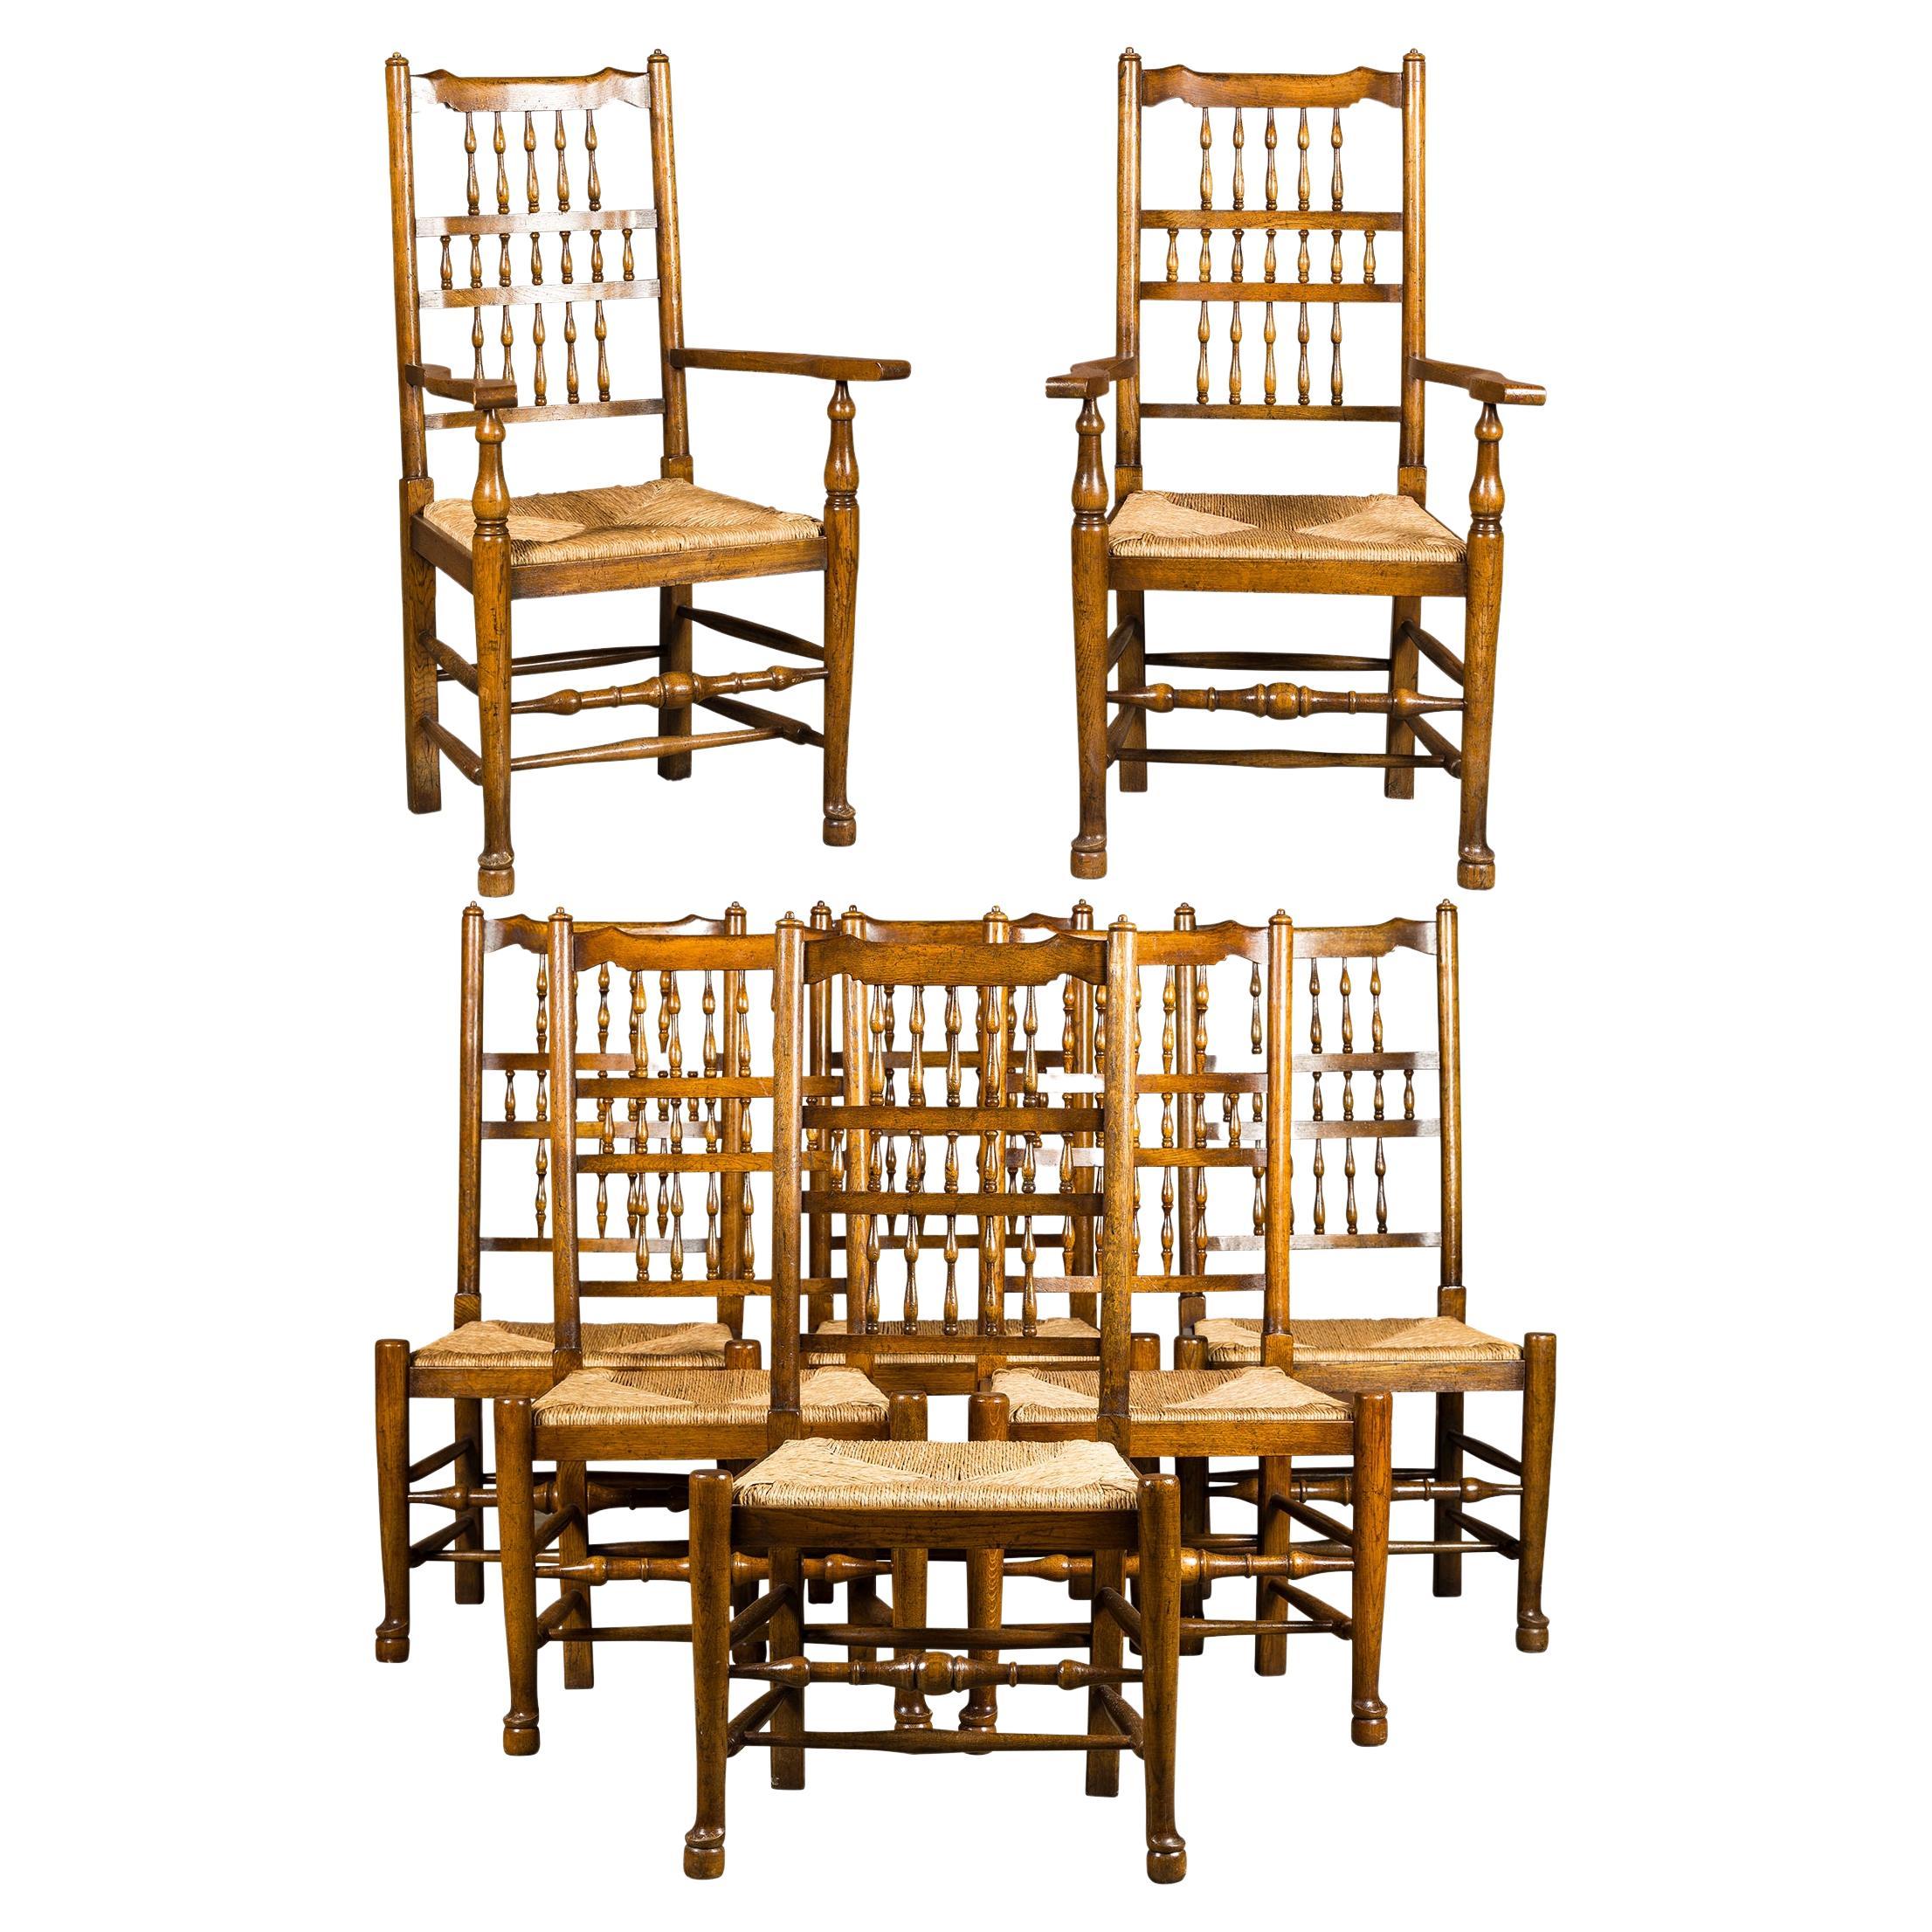 Set of Eight Vintage English Oak Dining Room Chairs with Rush Seats